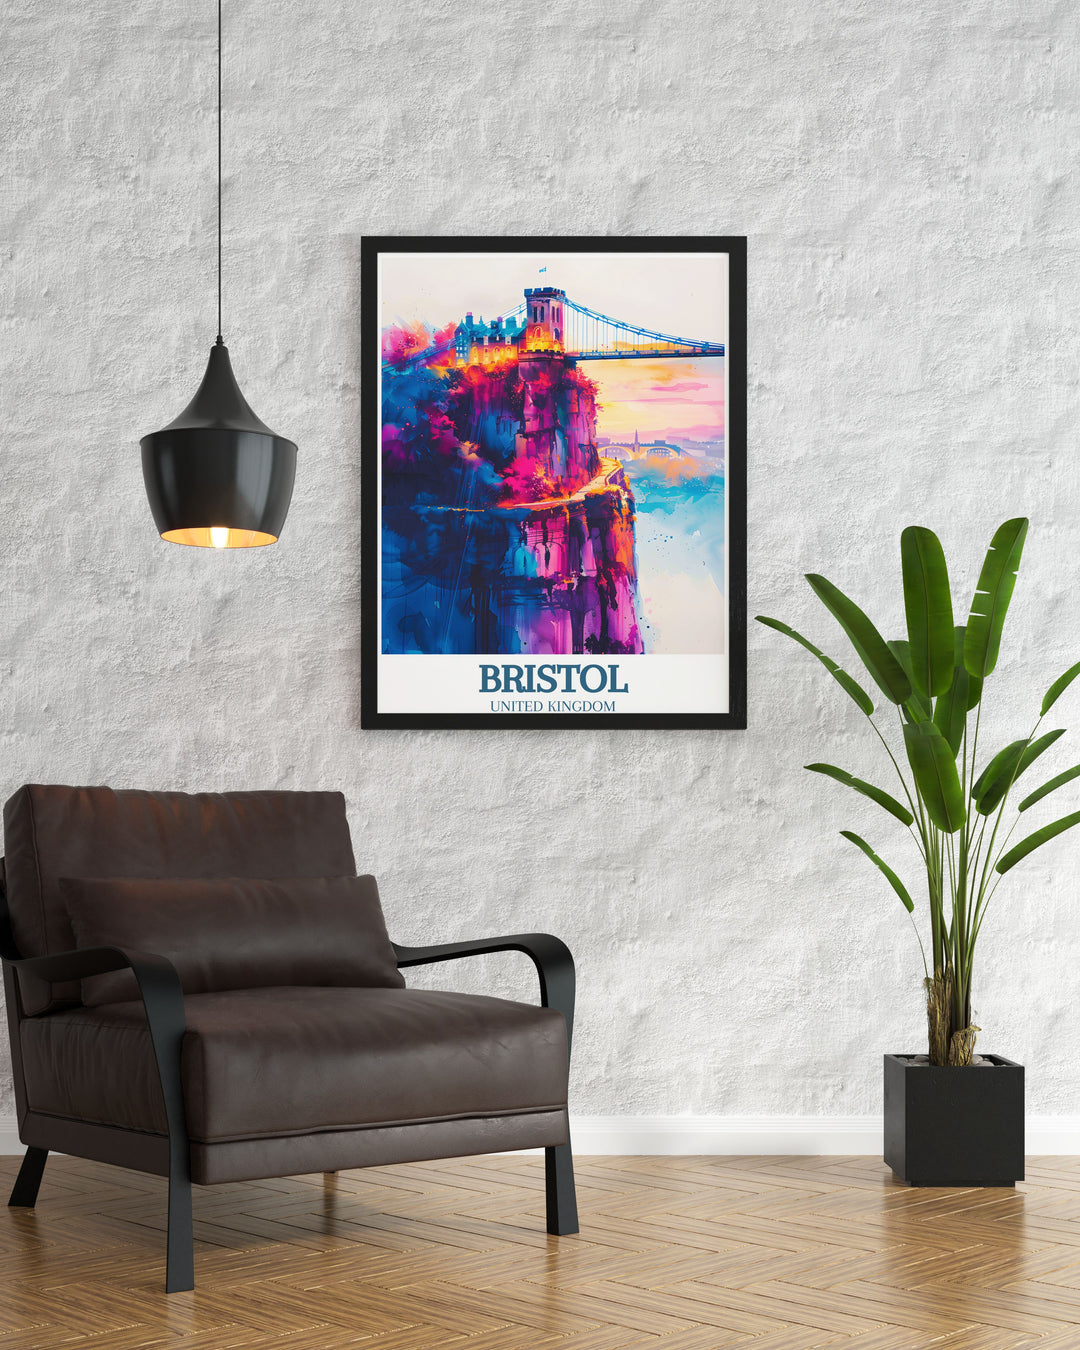 Bristol MTB Poster displaying the dynamic Nova Trail MTB and the iconic Clifton suspension bridge River Avon. Ideal for mountain biking fans and those who appreciate Bristols landmarks, this print enhances any home decor with its vibrant energy.